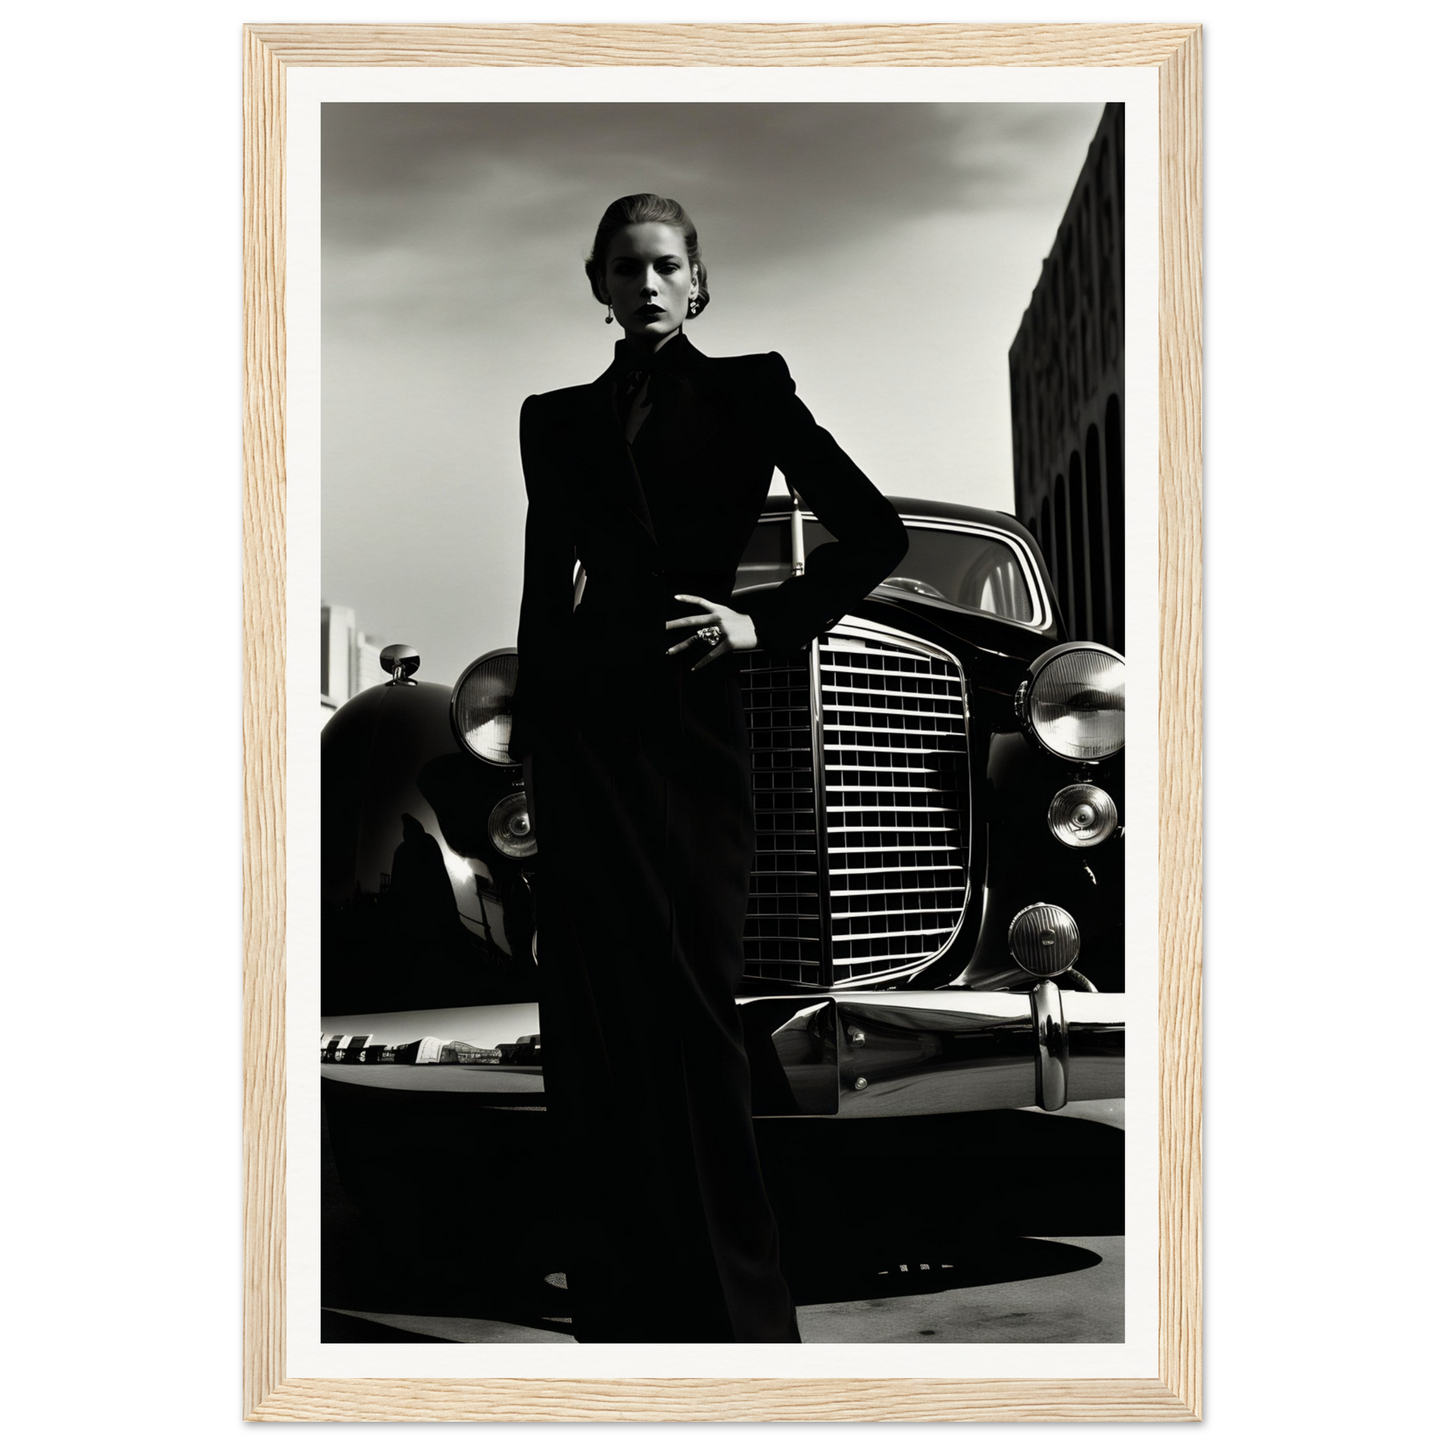 A woman standing next to an old car, perfect for a Helmut Wannabe The Edge The Oracle Windows™ Collection wall art poster for my wall.